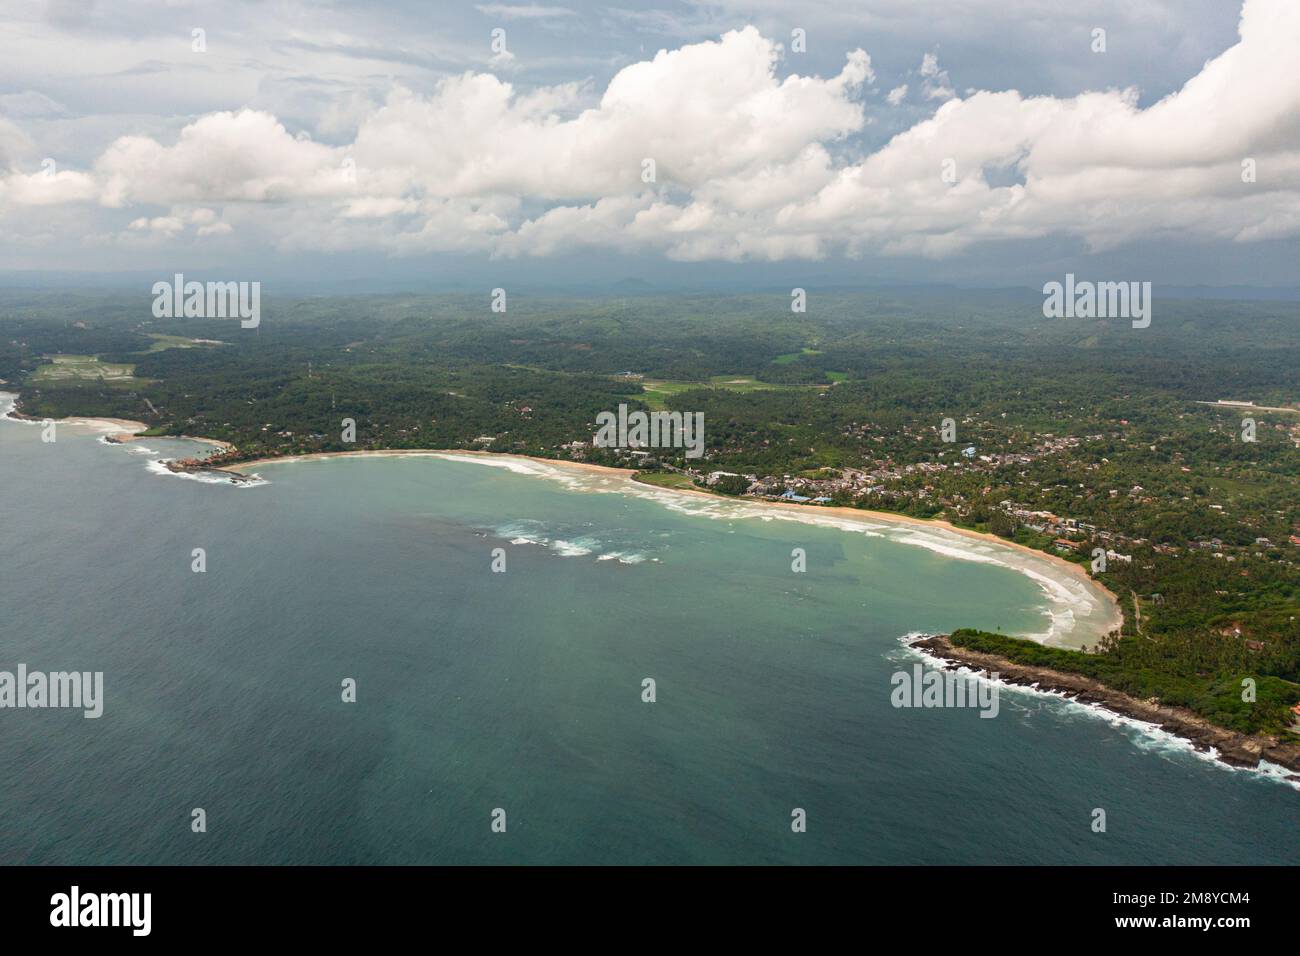 Aerial drone of coast with a beach and hotels among palm trees. Dickwella Beach, Sri Lanka. Stock Photo